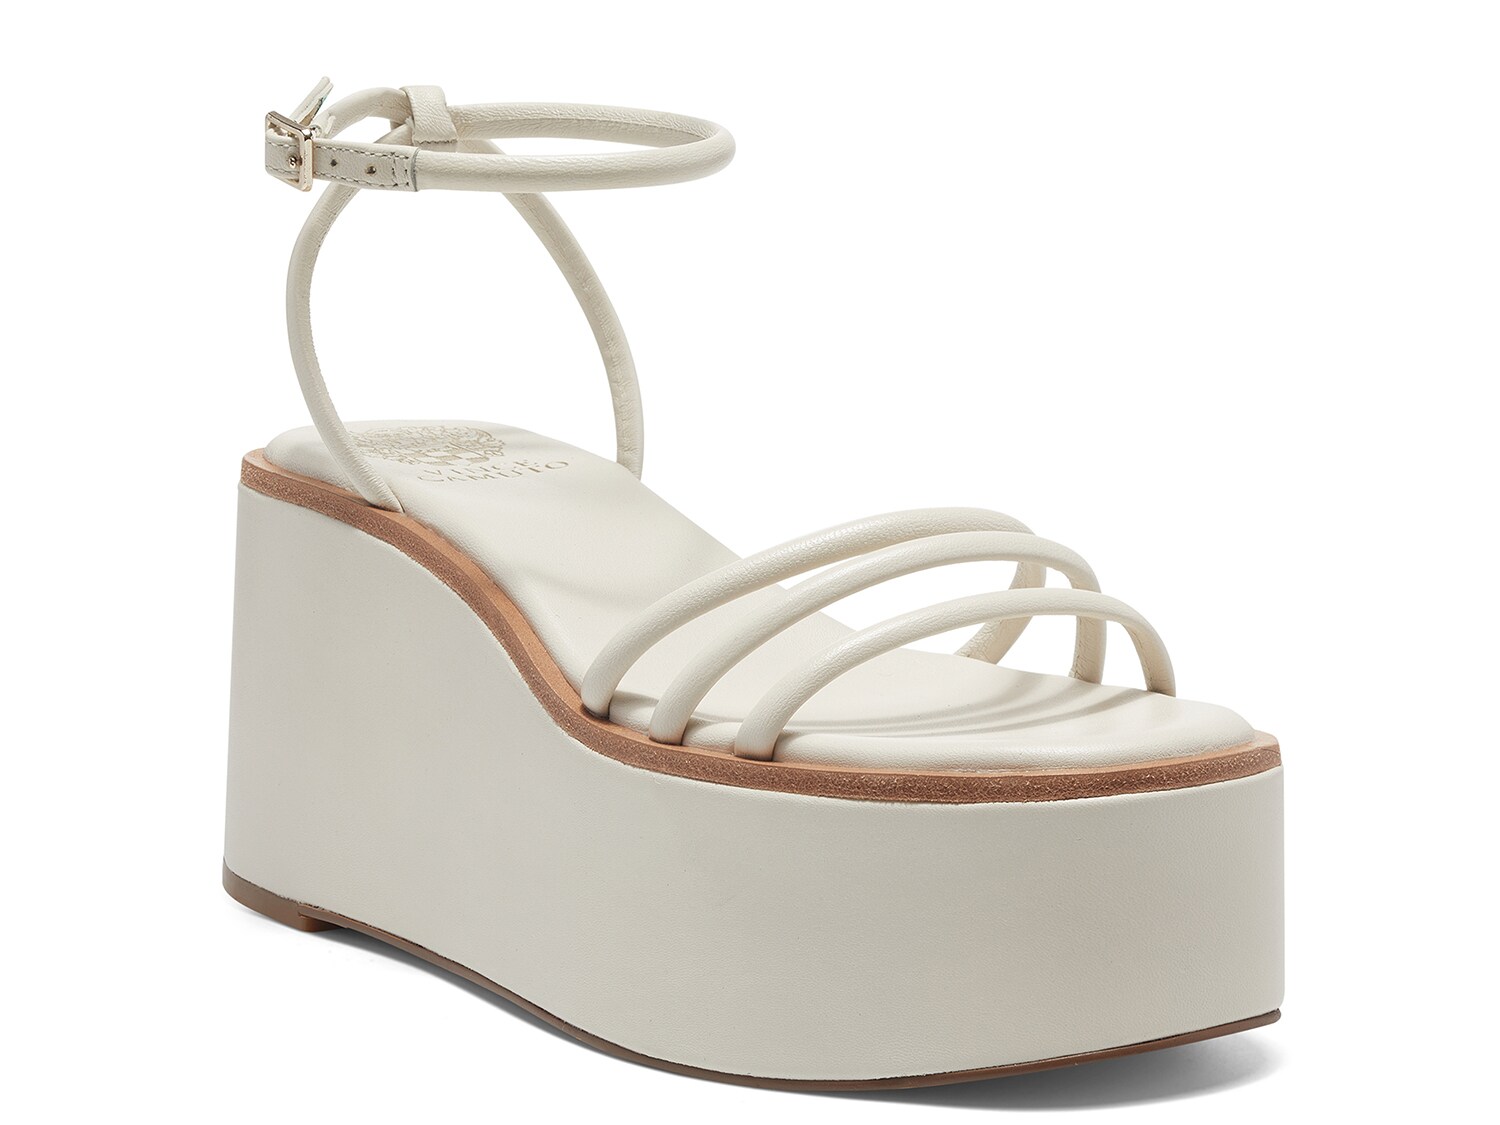 Vince Camuto Graceny Sandal - Free Shipping | DSW